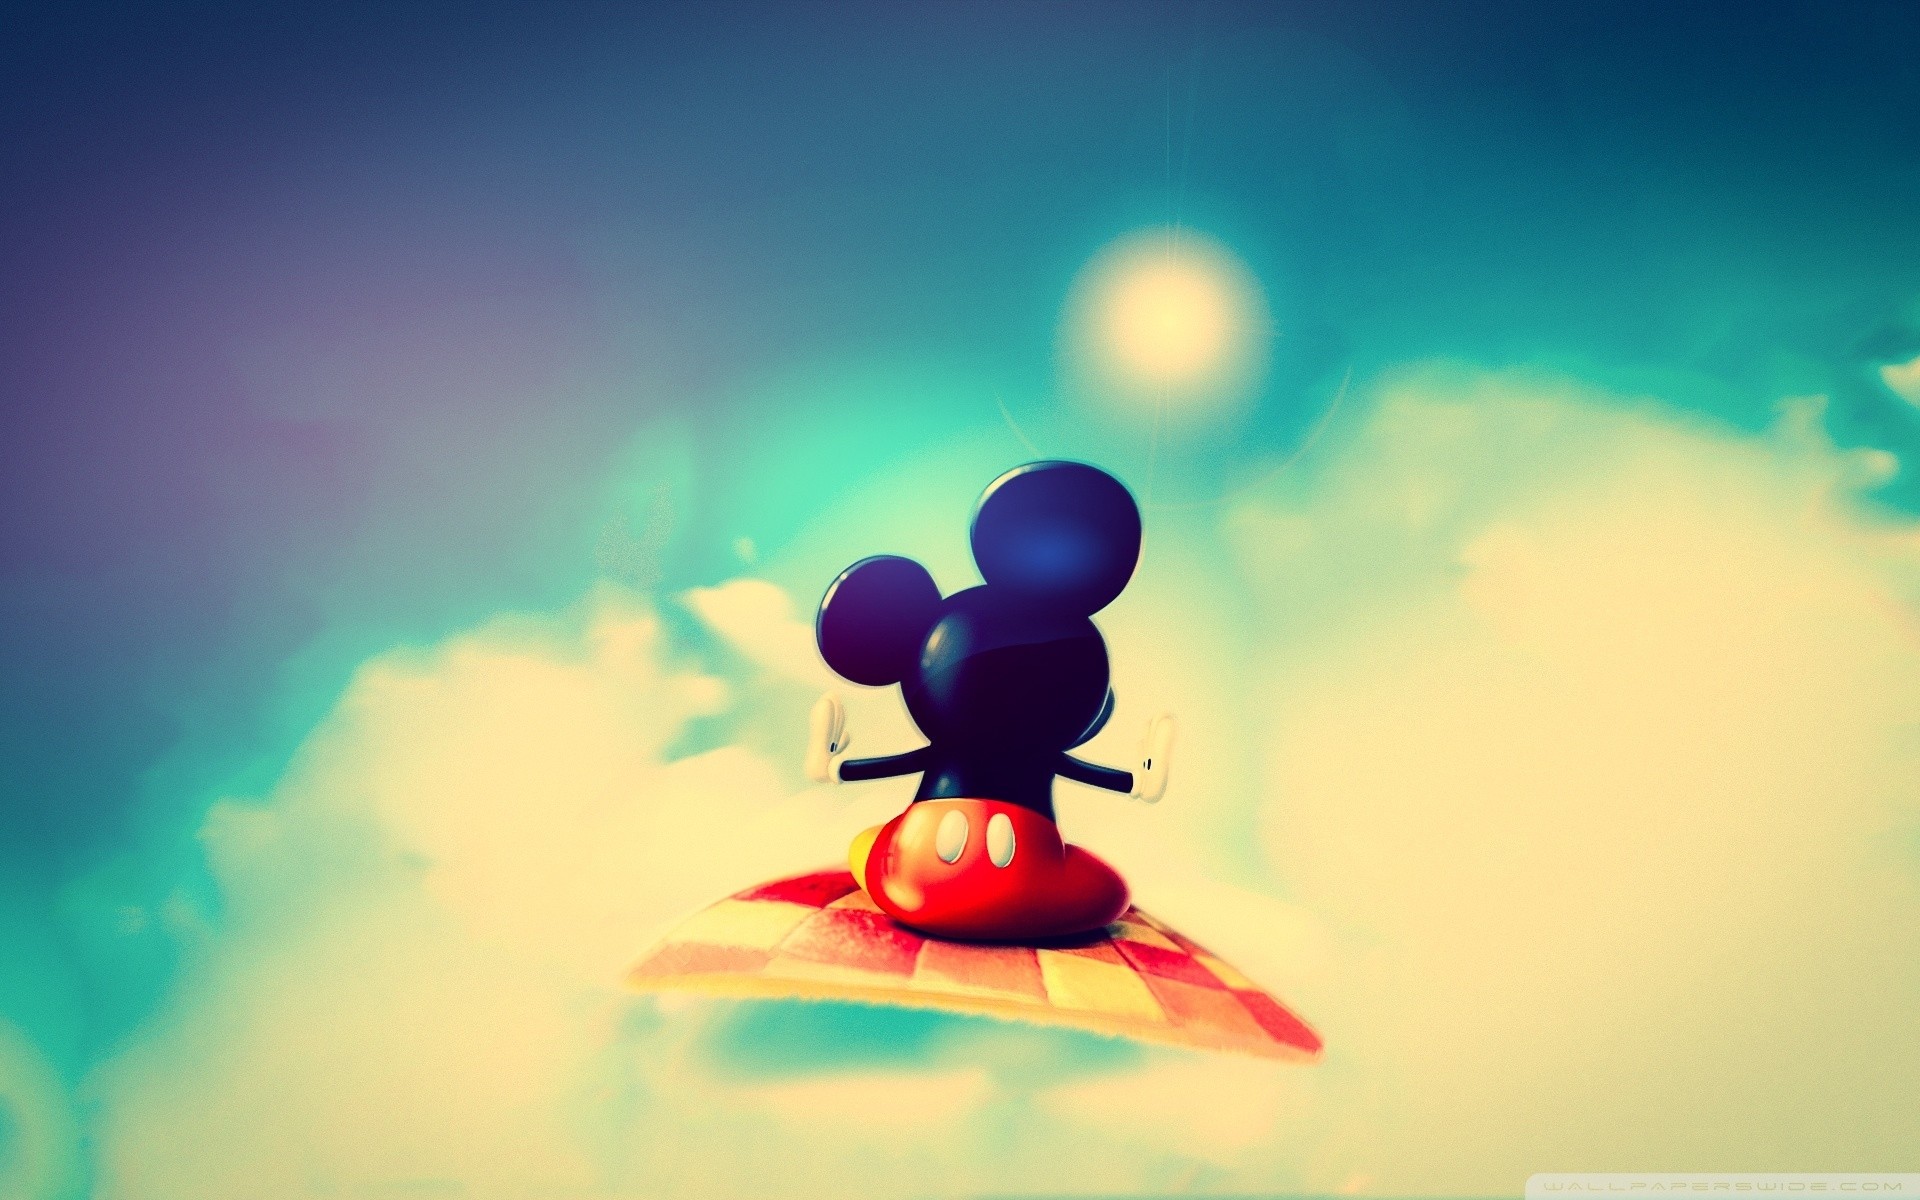 1920x1200 Title : cute mickey mouse â¤ 4k hd desktop wallpaper for 4k ultra hd tv.  Dimension : 1920 x 1200. File Type : JPG/JPEG. 10 Most Popular ...